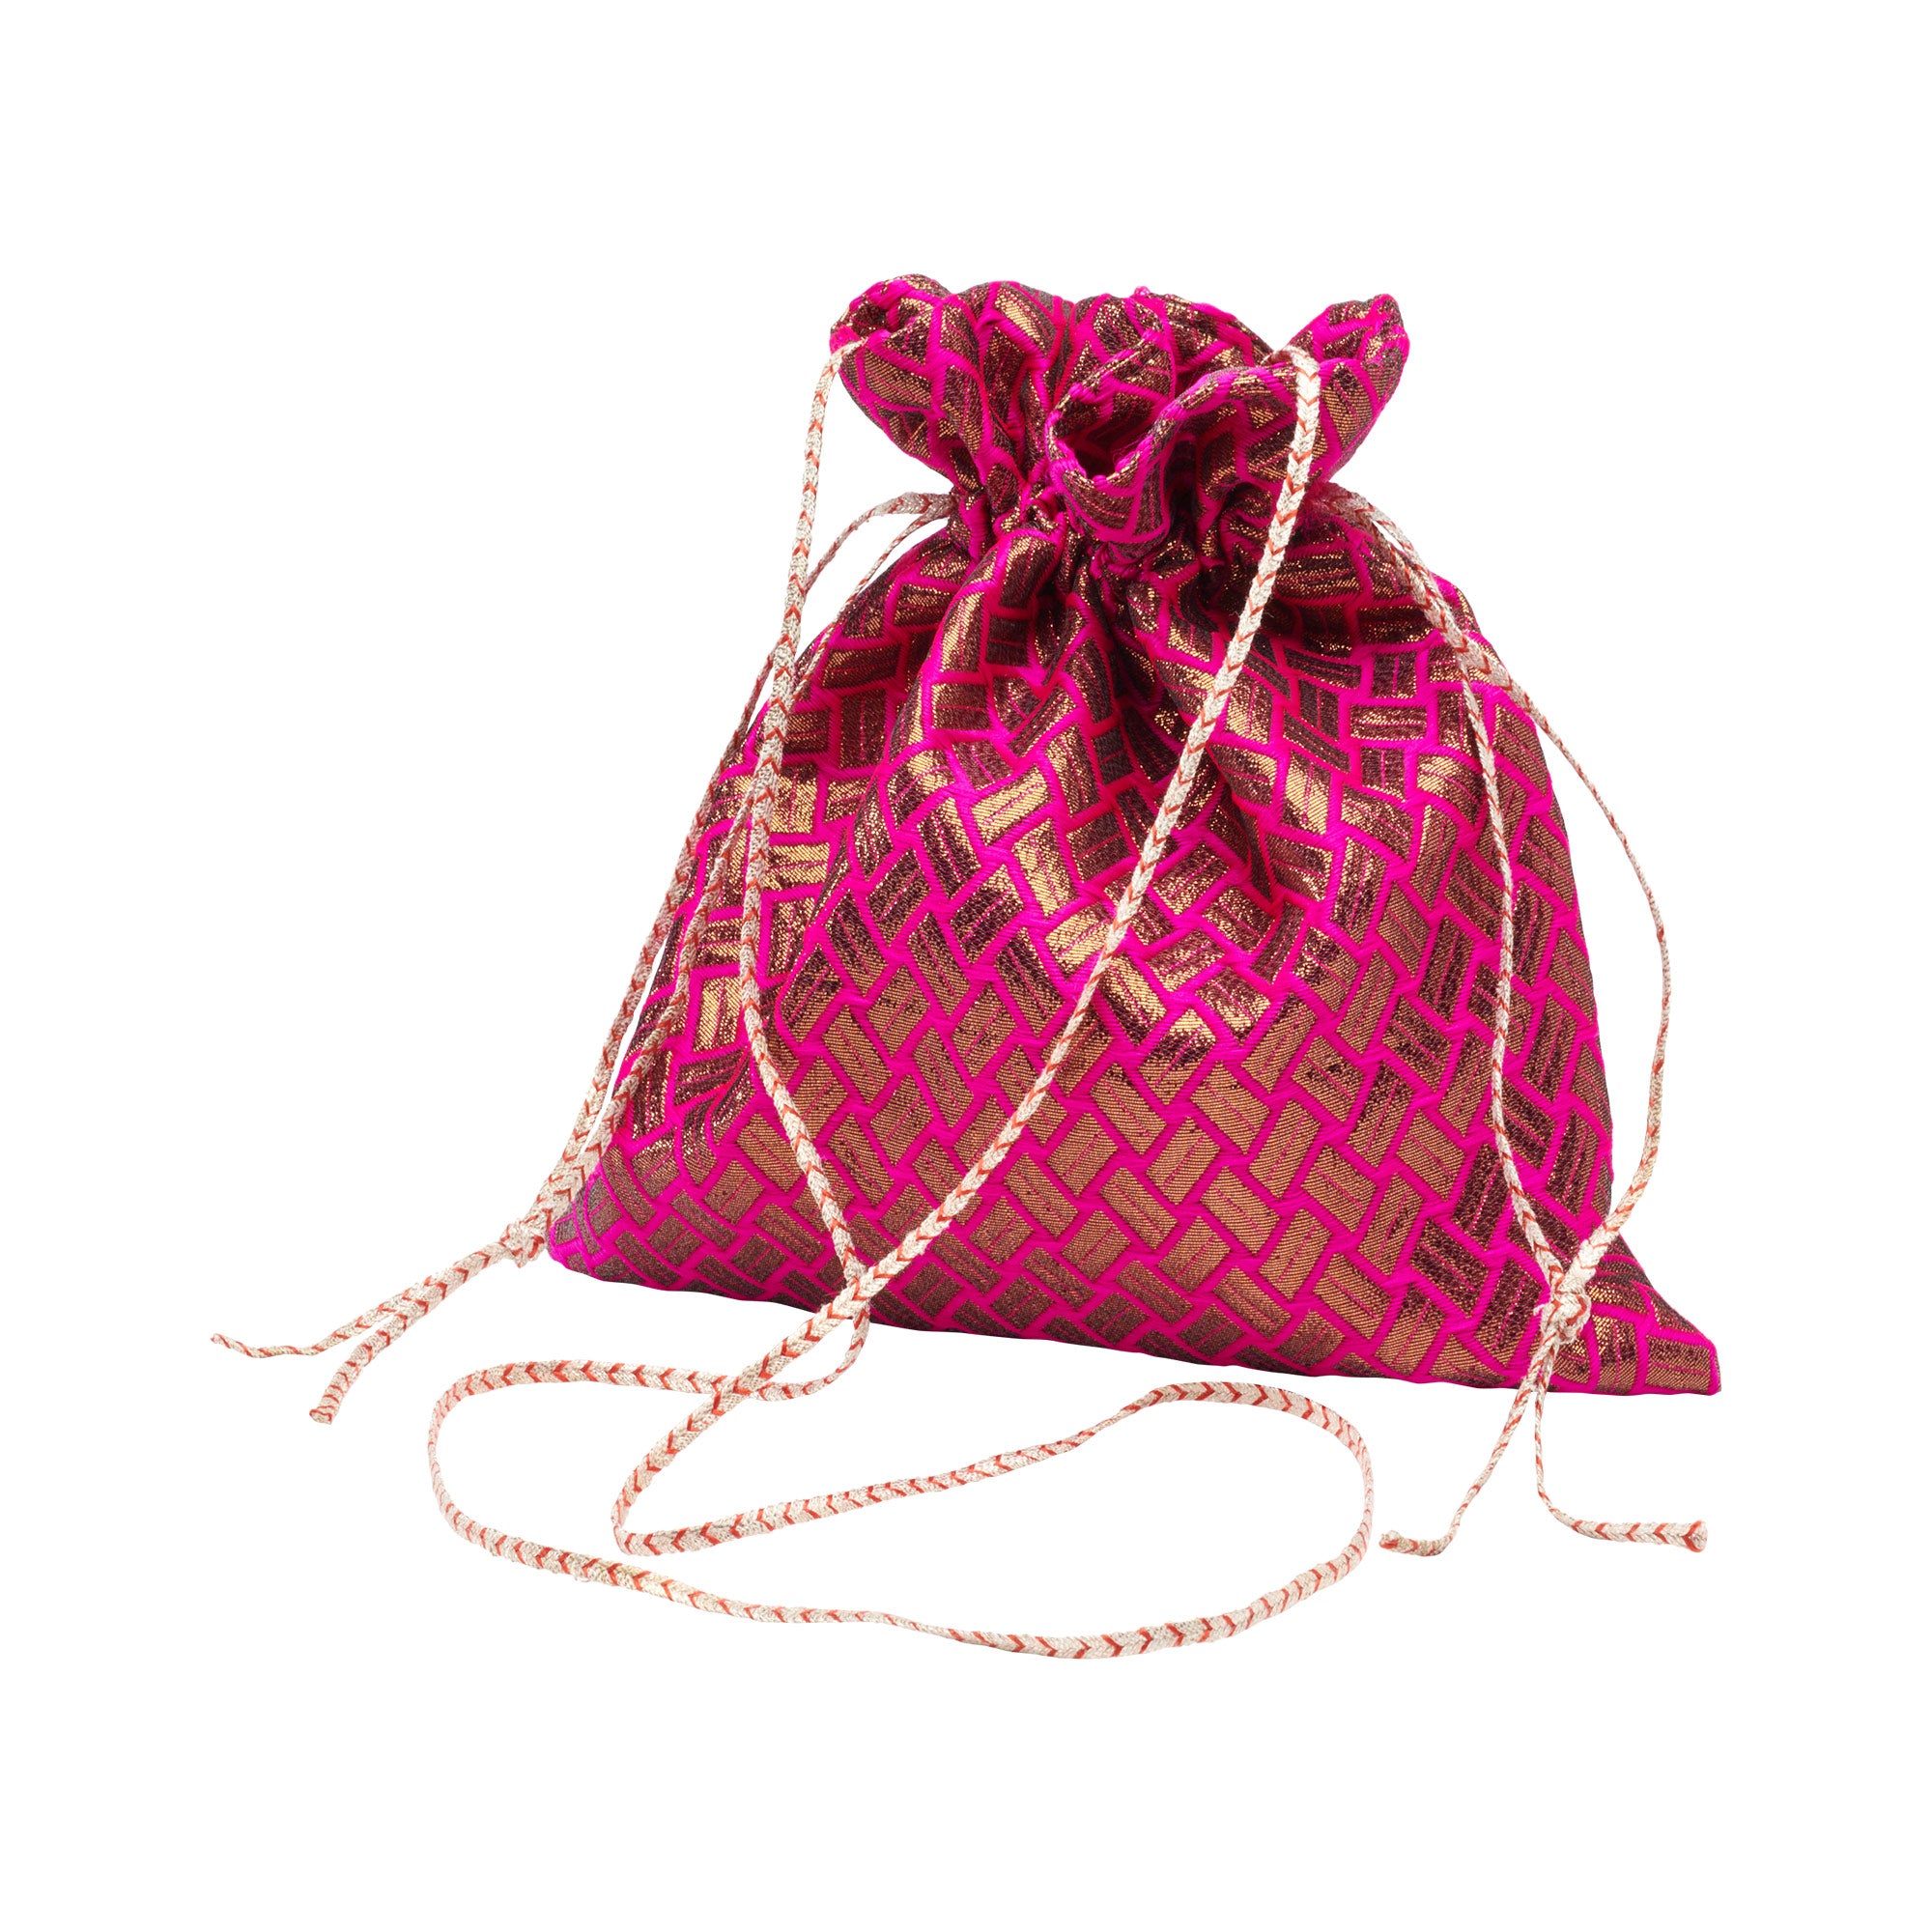 Noni Pouch - Penny Lane Hot Pink